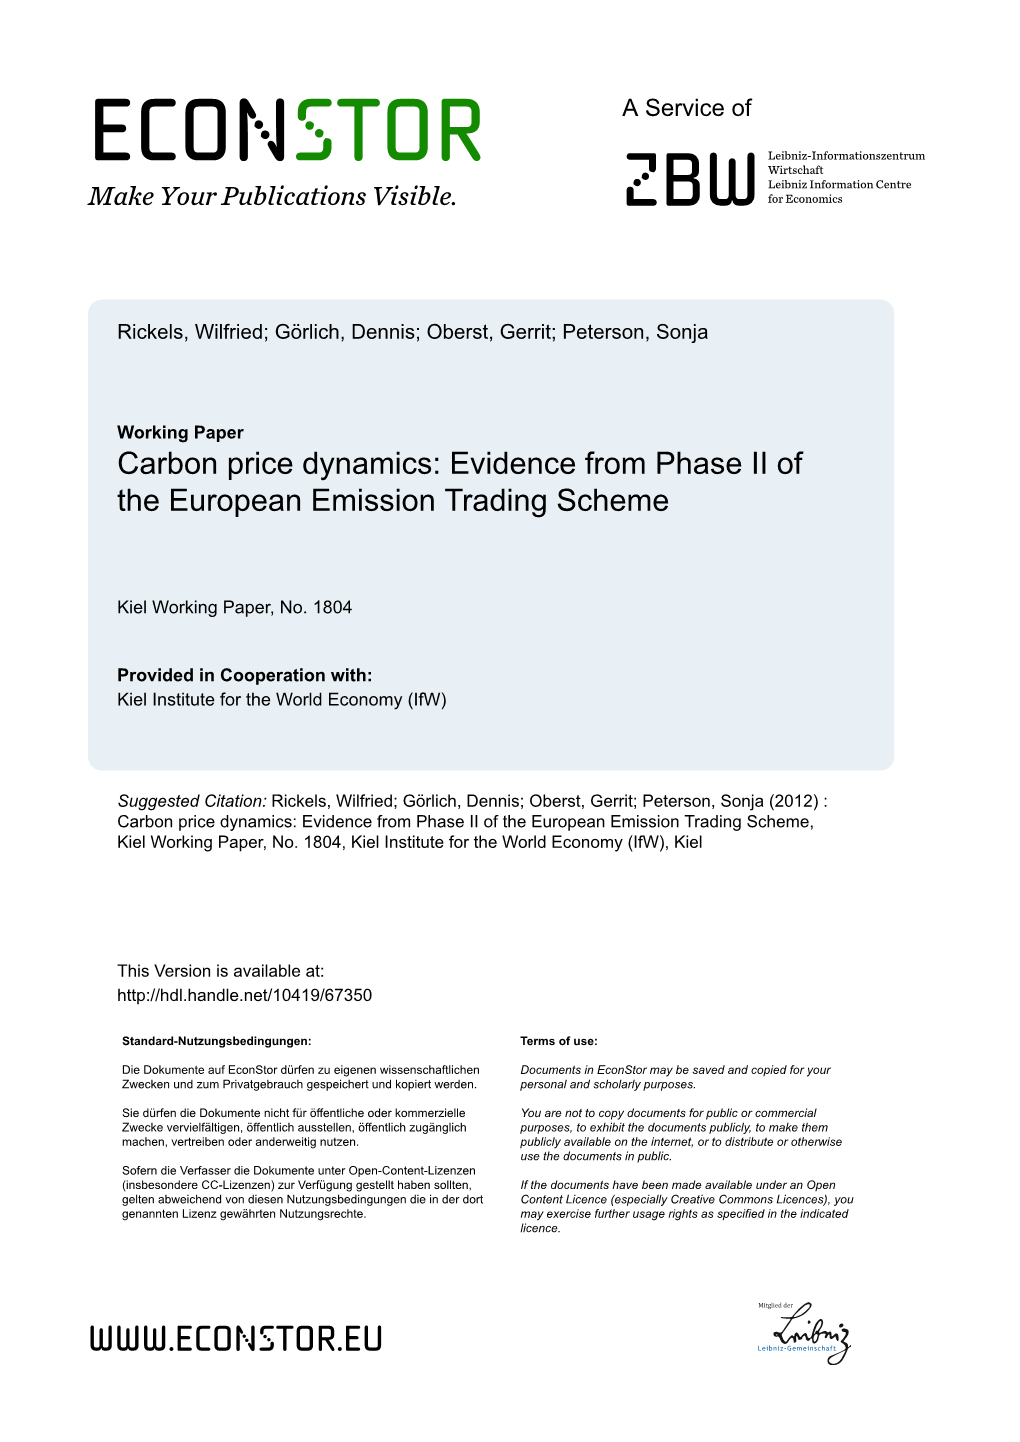 Evidence from Phase II of the European Emission Trading Scheme